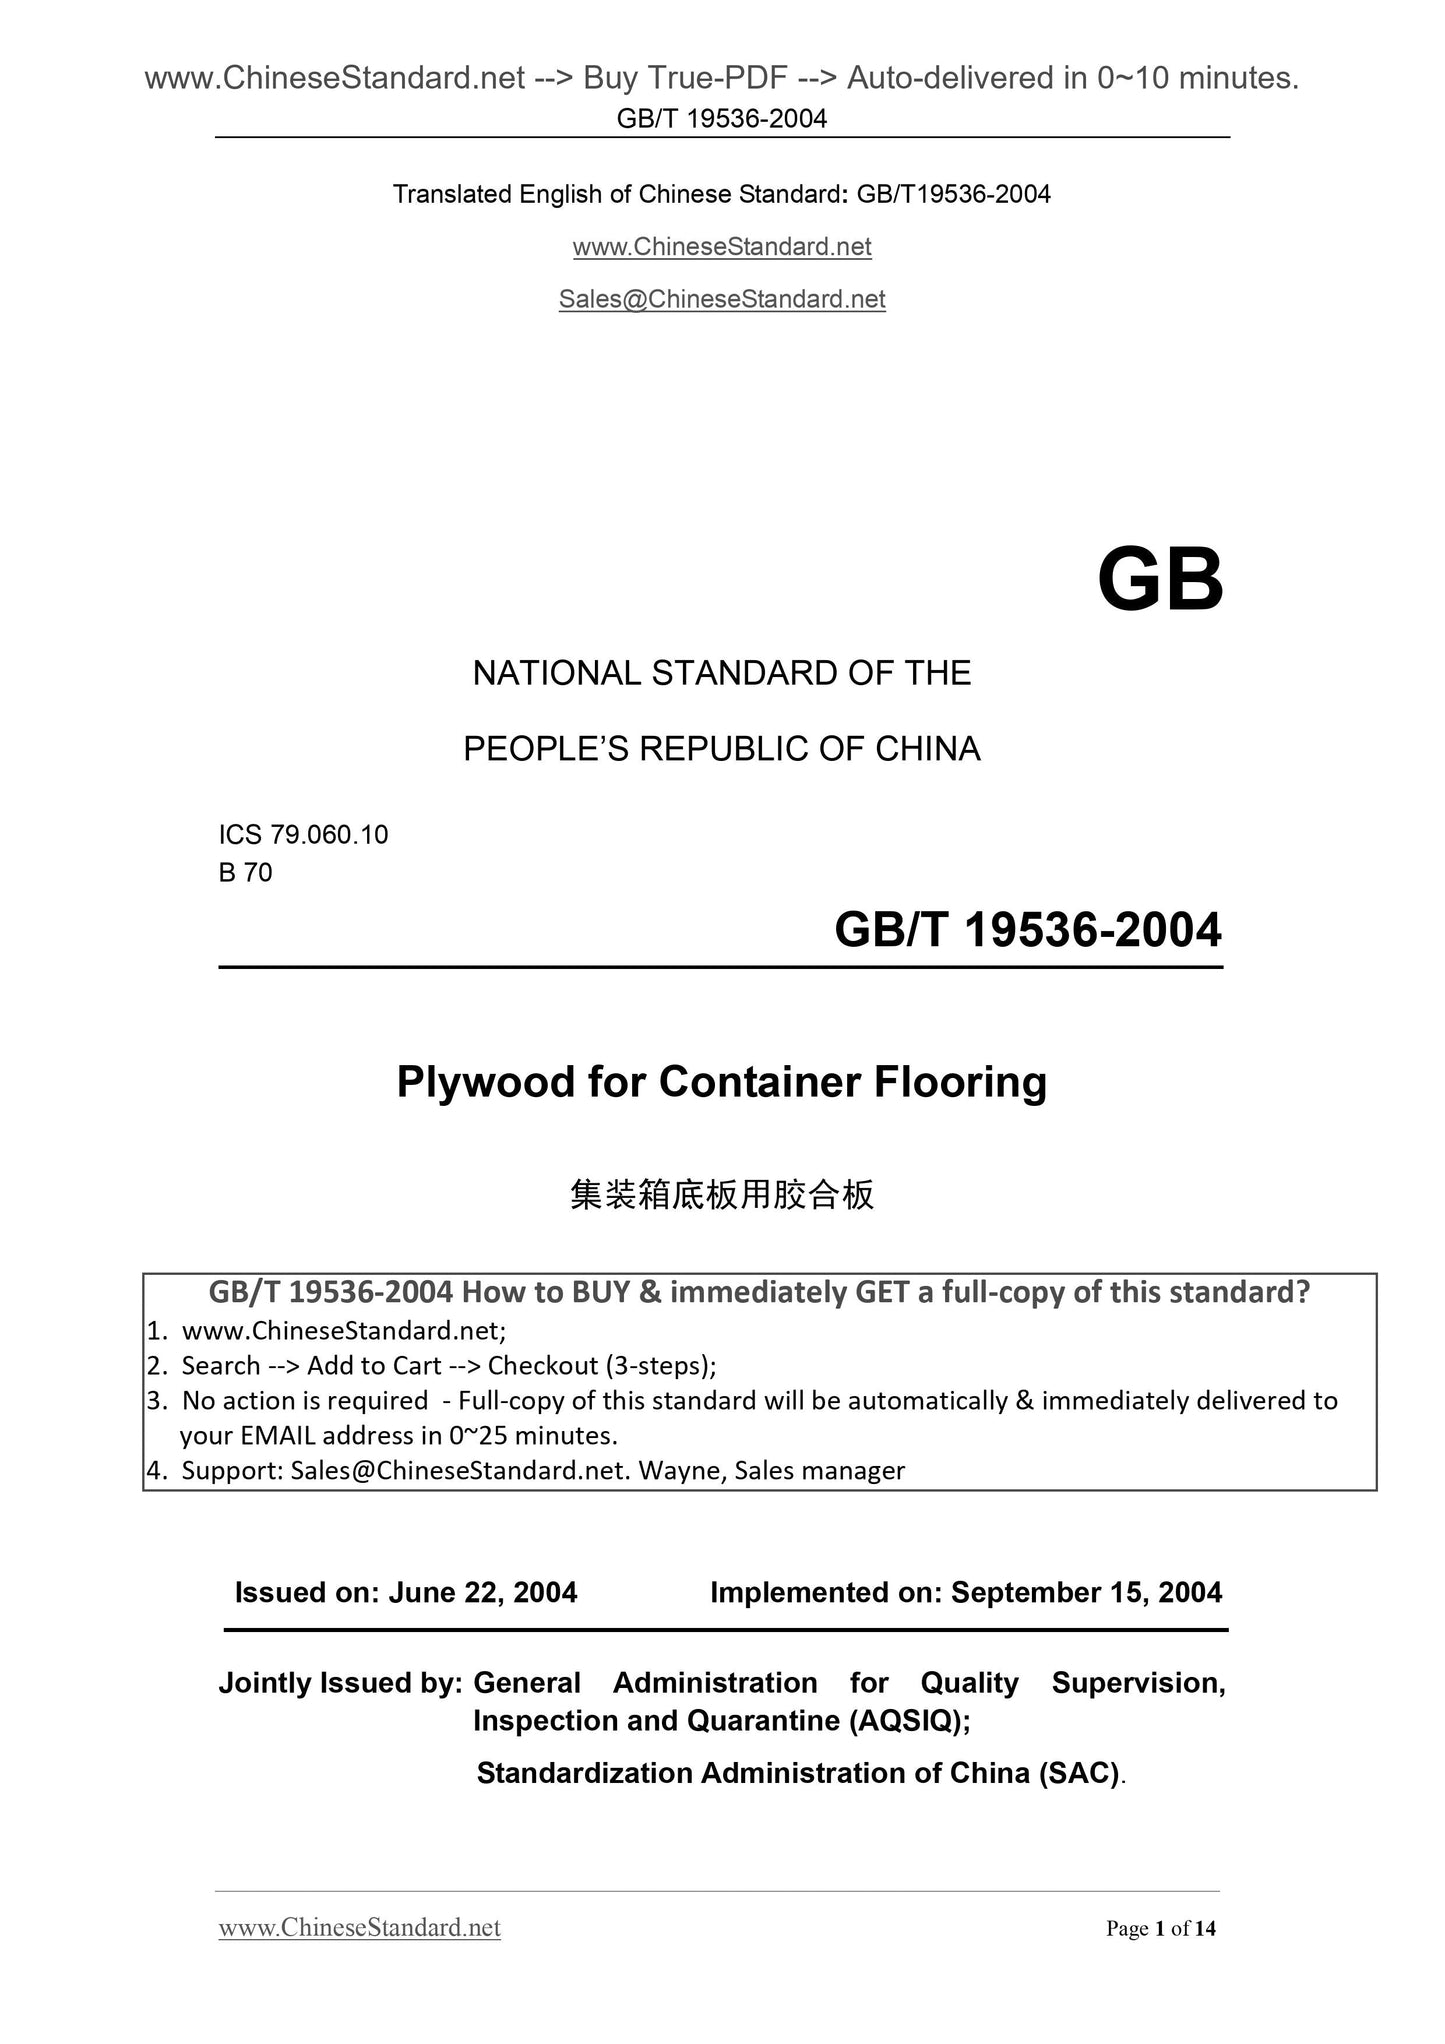 GB/T 19536-2004 Page 1